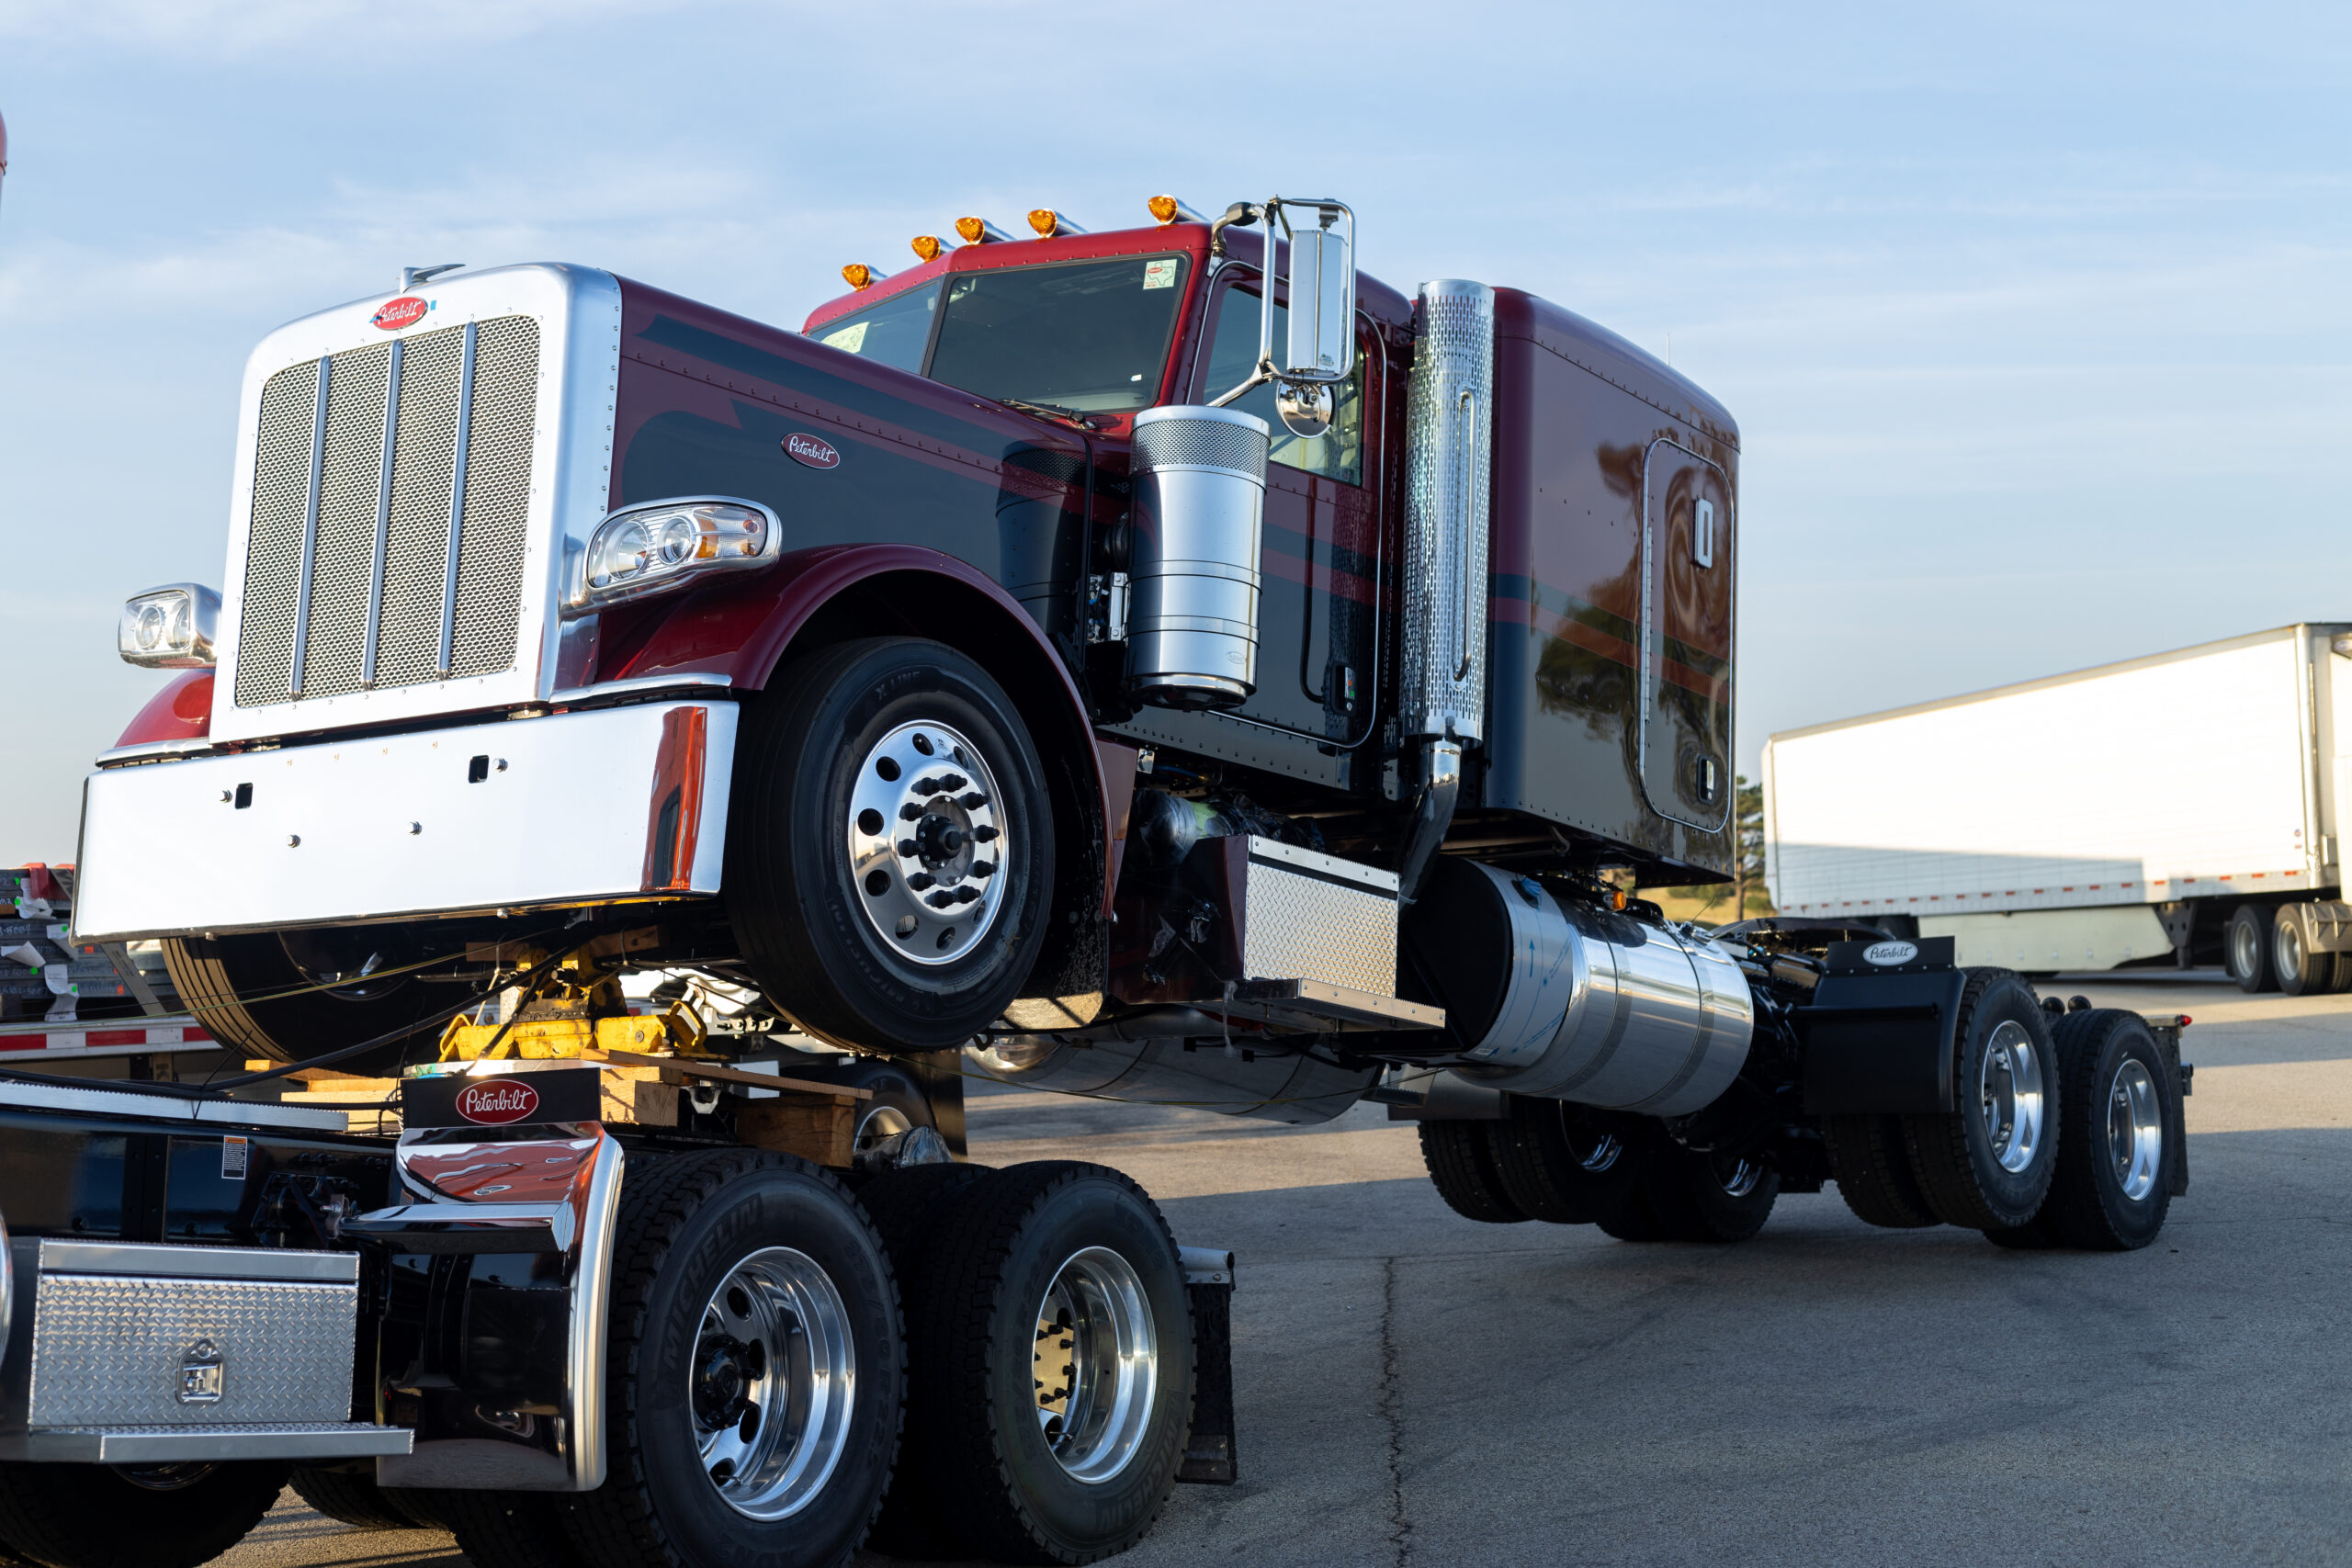 What To Look for in a Heavy-Duty Towing Company